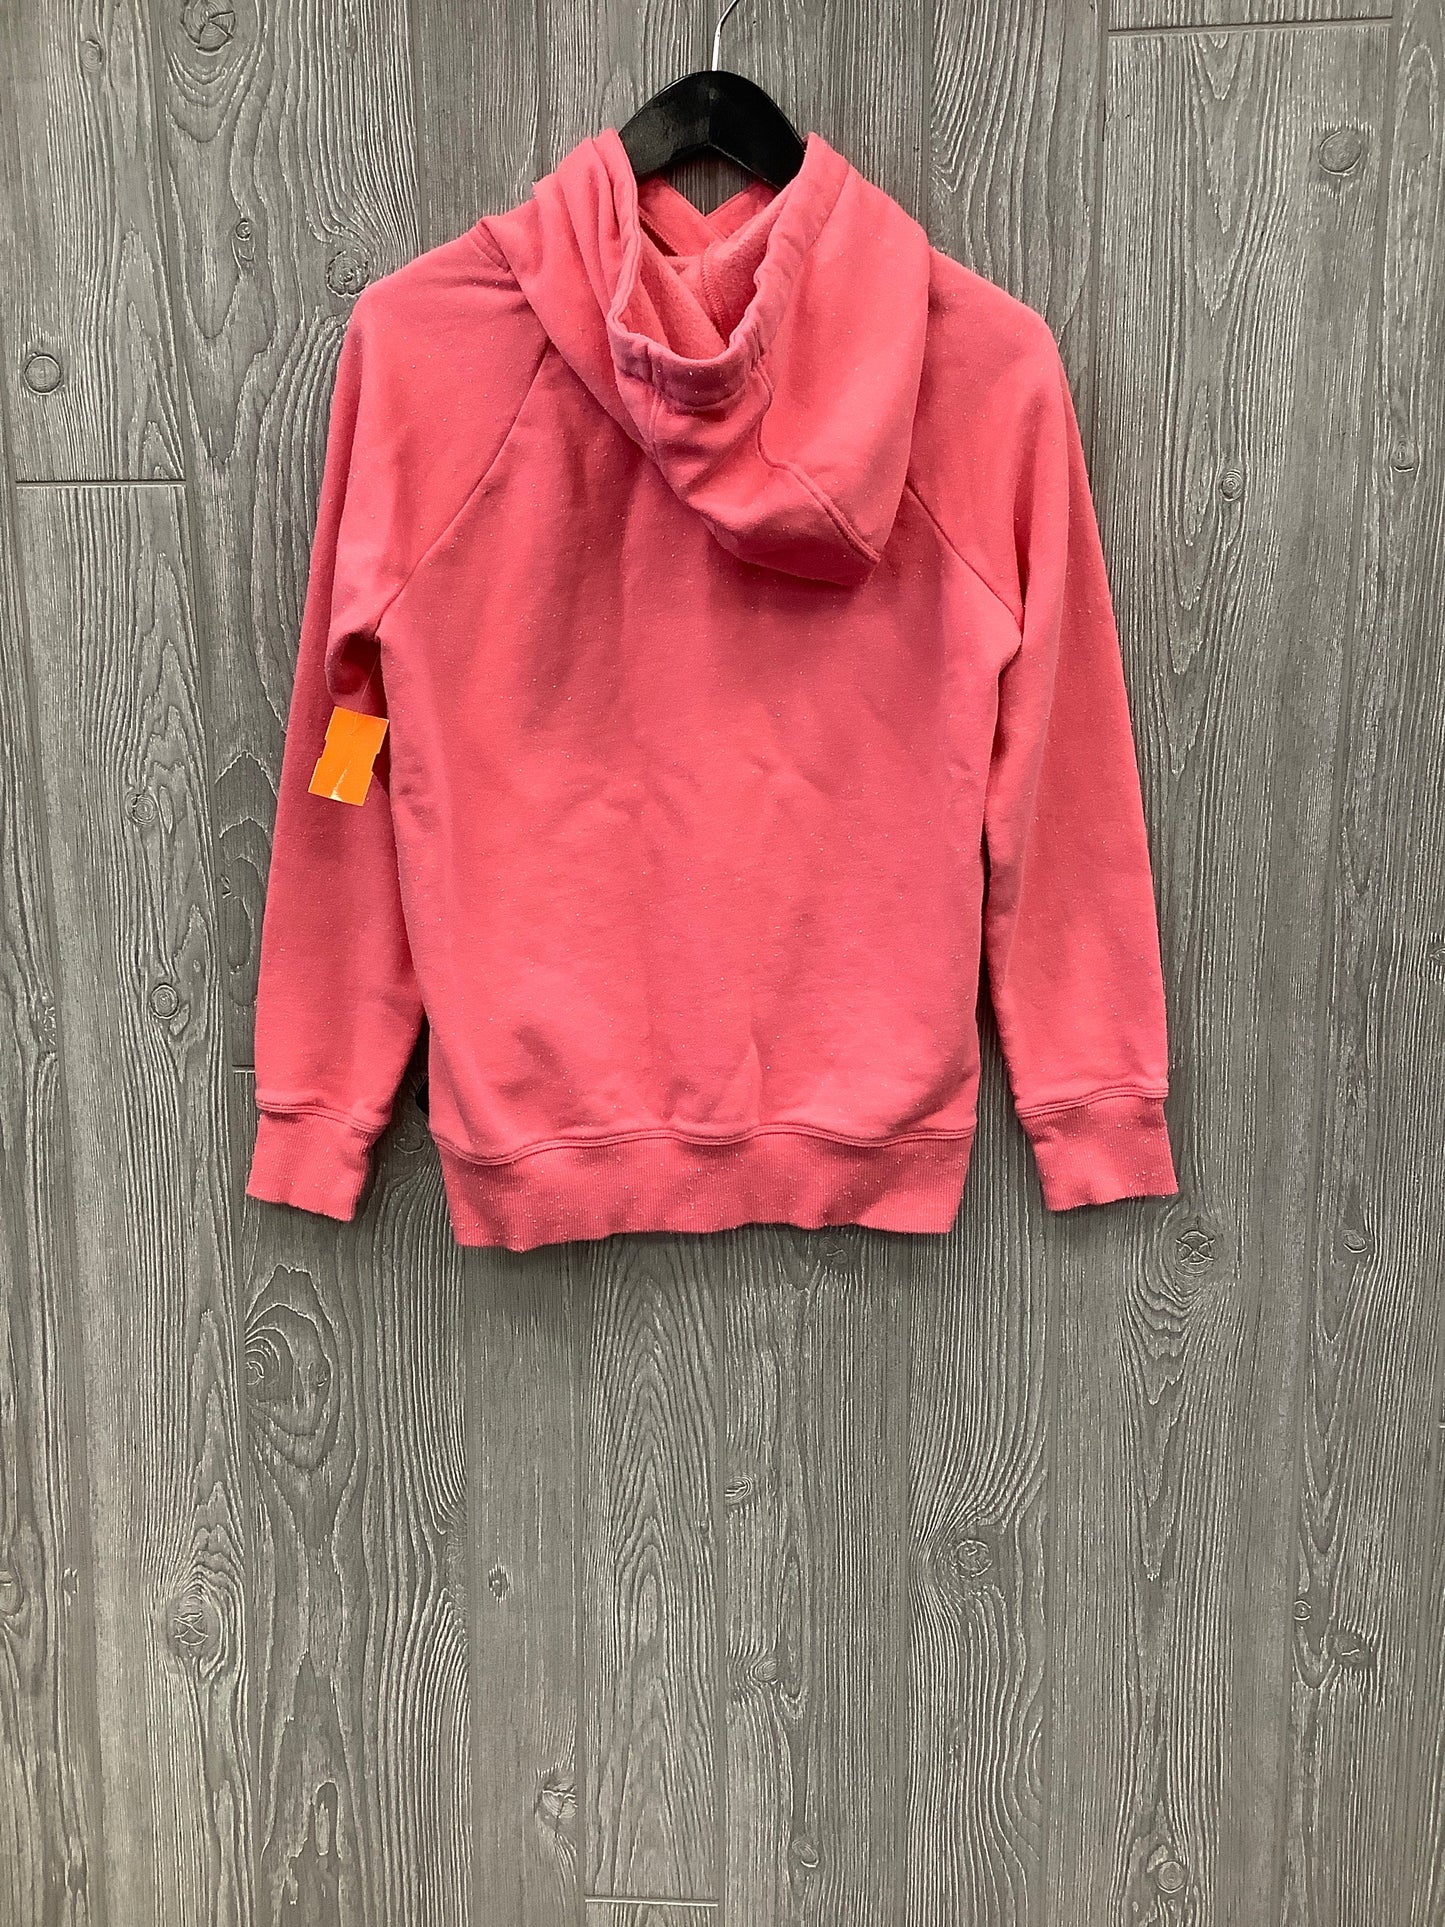 Sweatshirt Hoodie By Under Armour  Size: Xs